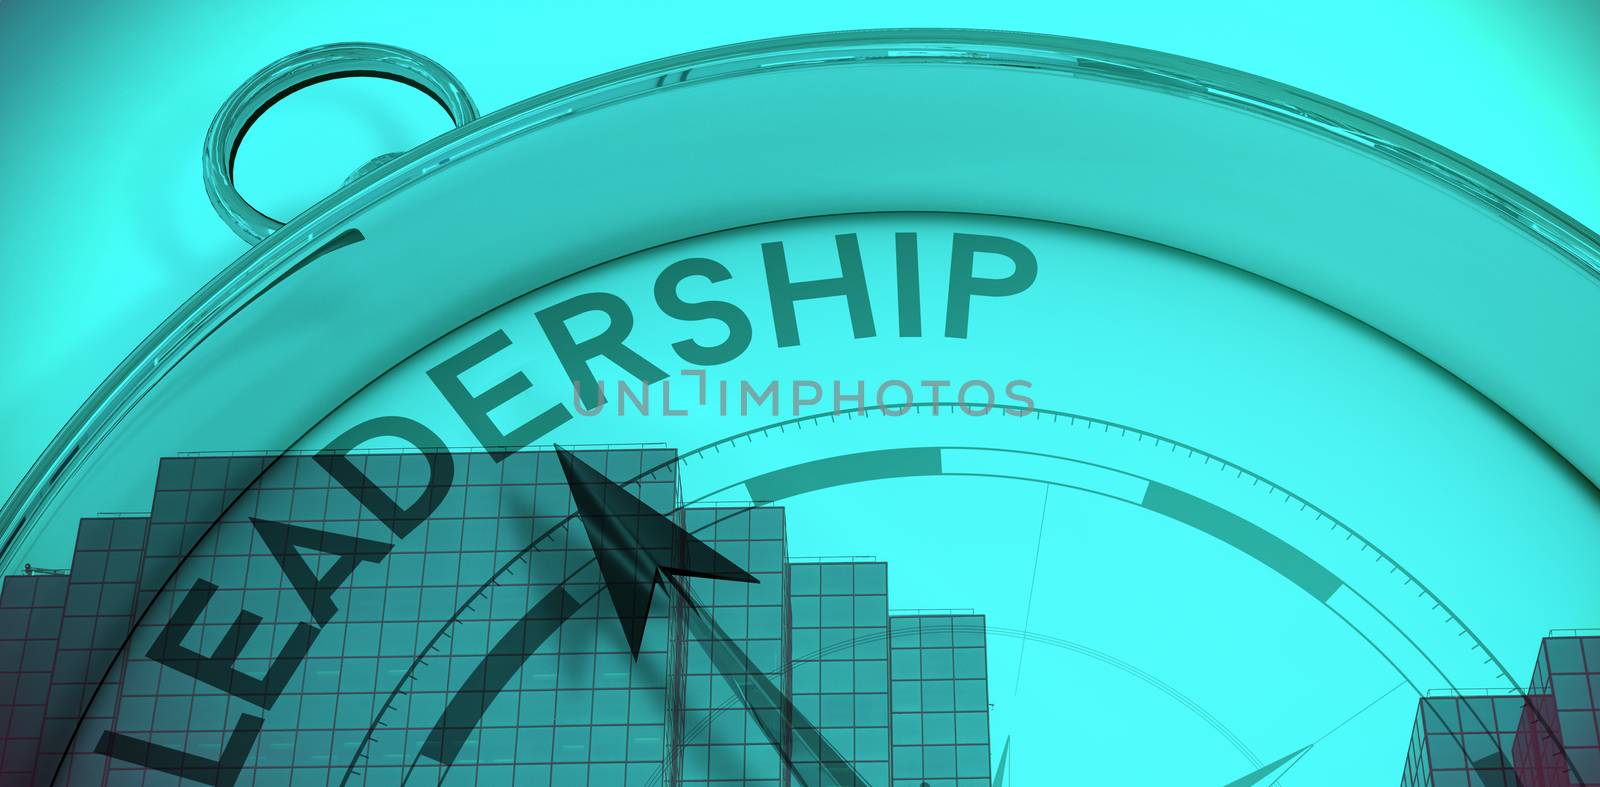 Compass pointing to leadership against low angle view of office building against blue sky